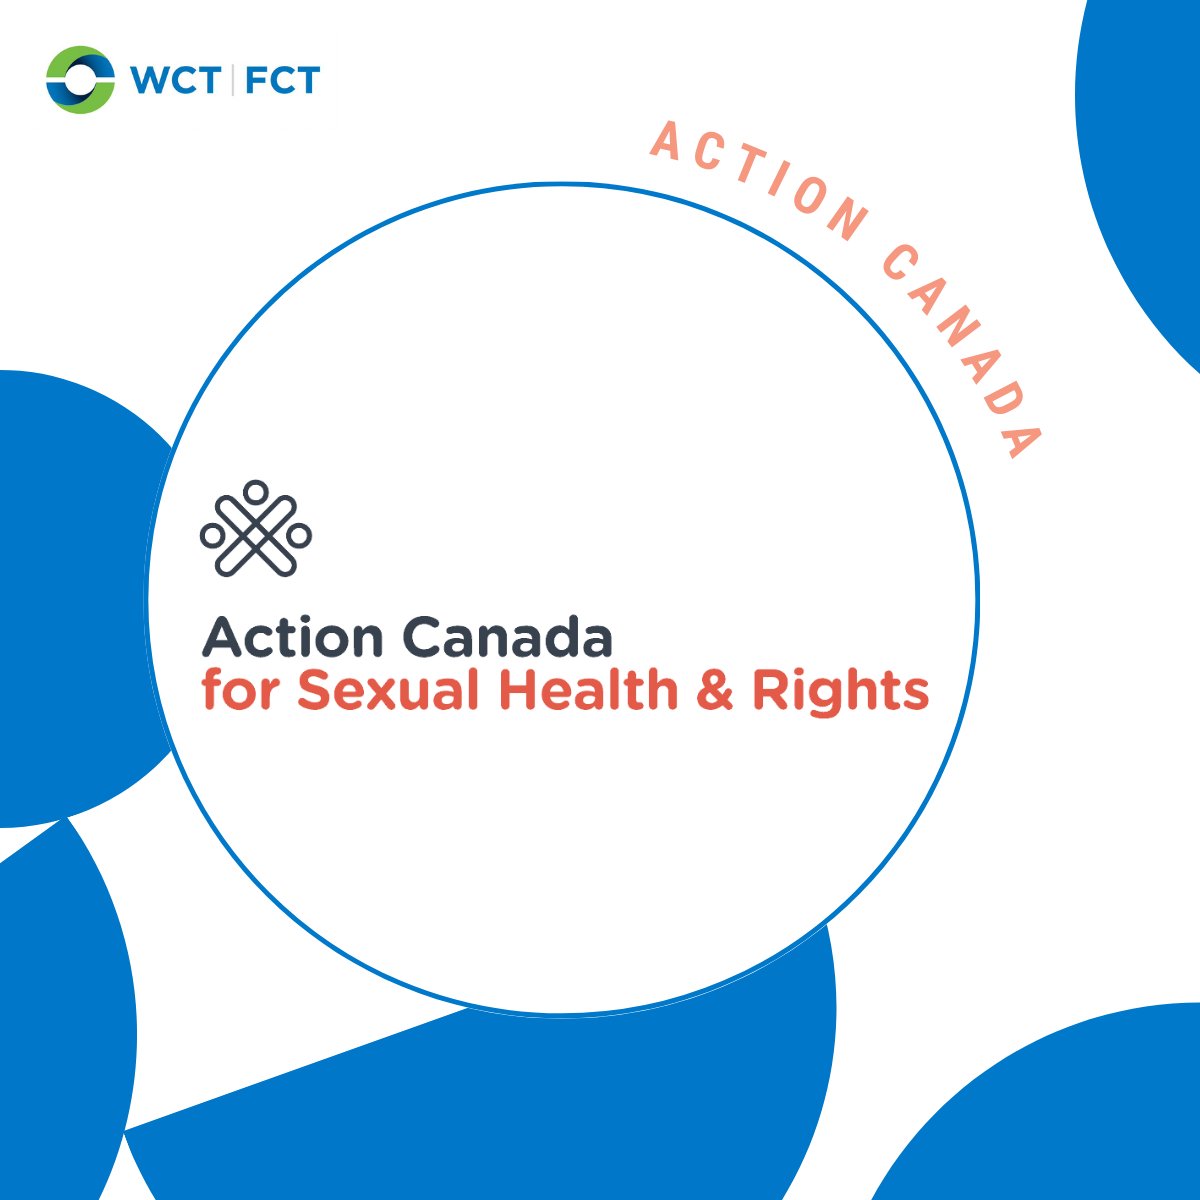 Action Canada for Gender Equity: Action Canada is a driving force in the fight for gender equity in Canada. They work tirelessly to advance sexual and reproductive health and rights, advocating for inclusive policies and comprehensive education.